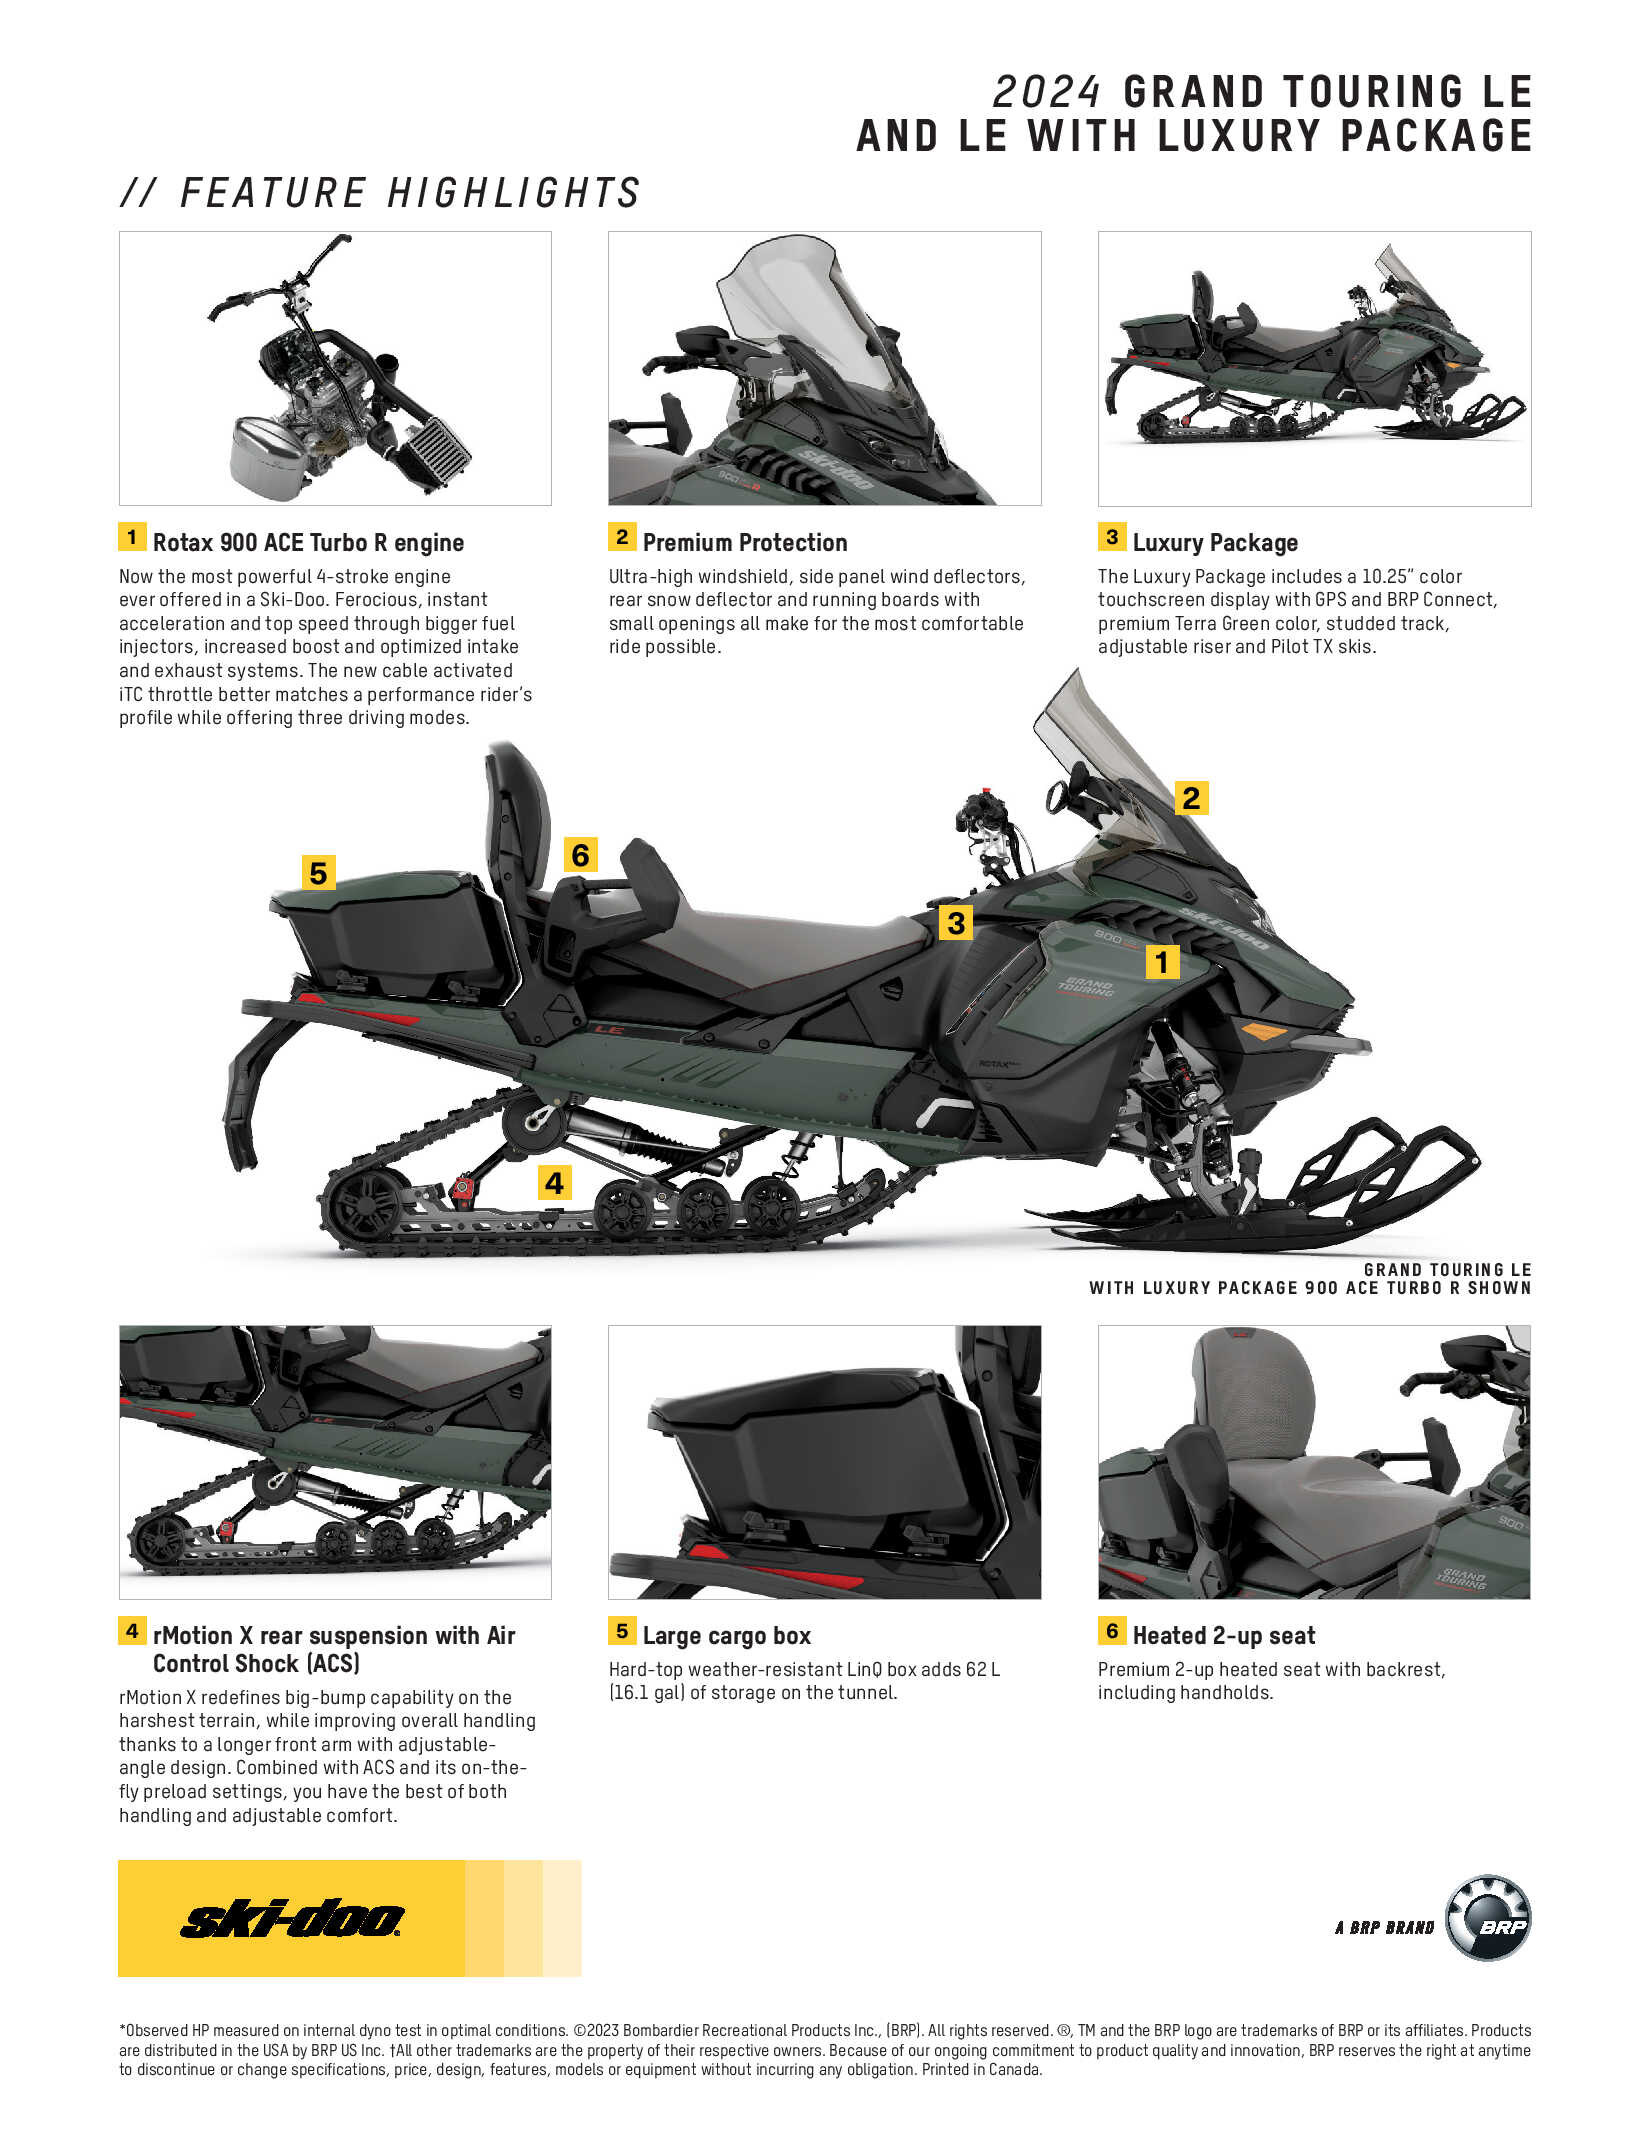 2024 Ski-Doo Grand touring LE Luxury Package 2